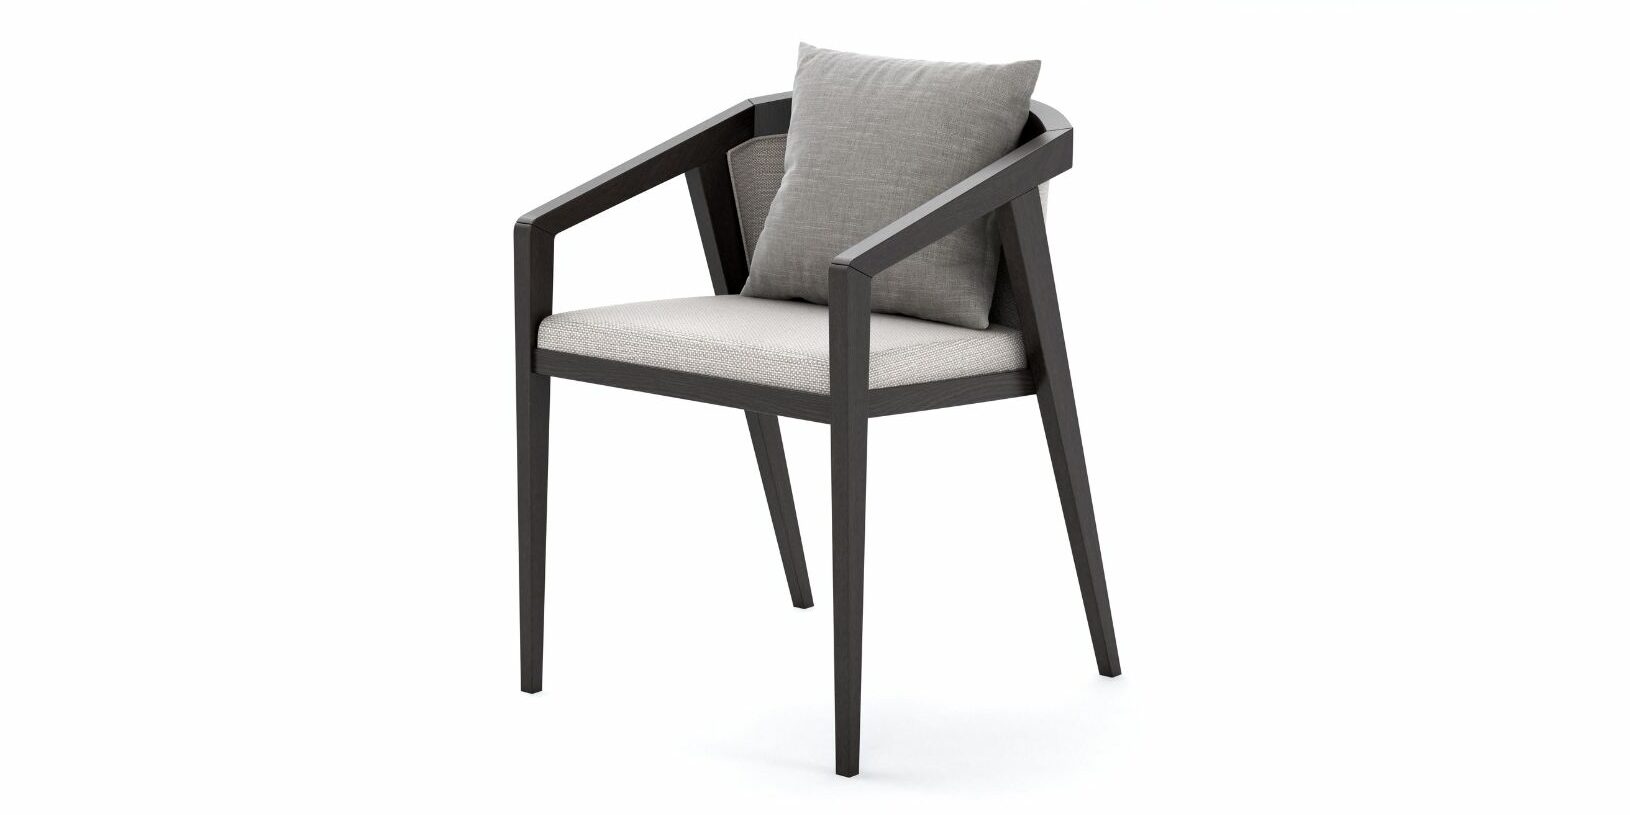 Porto Dining Chair in Outdoor Dining Chairs for Porto collection